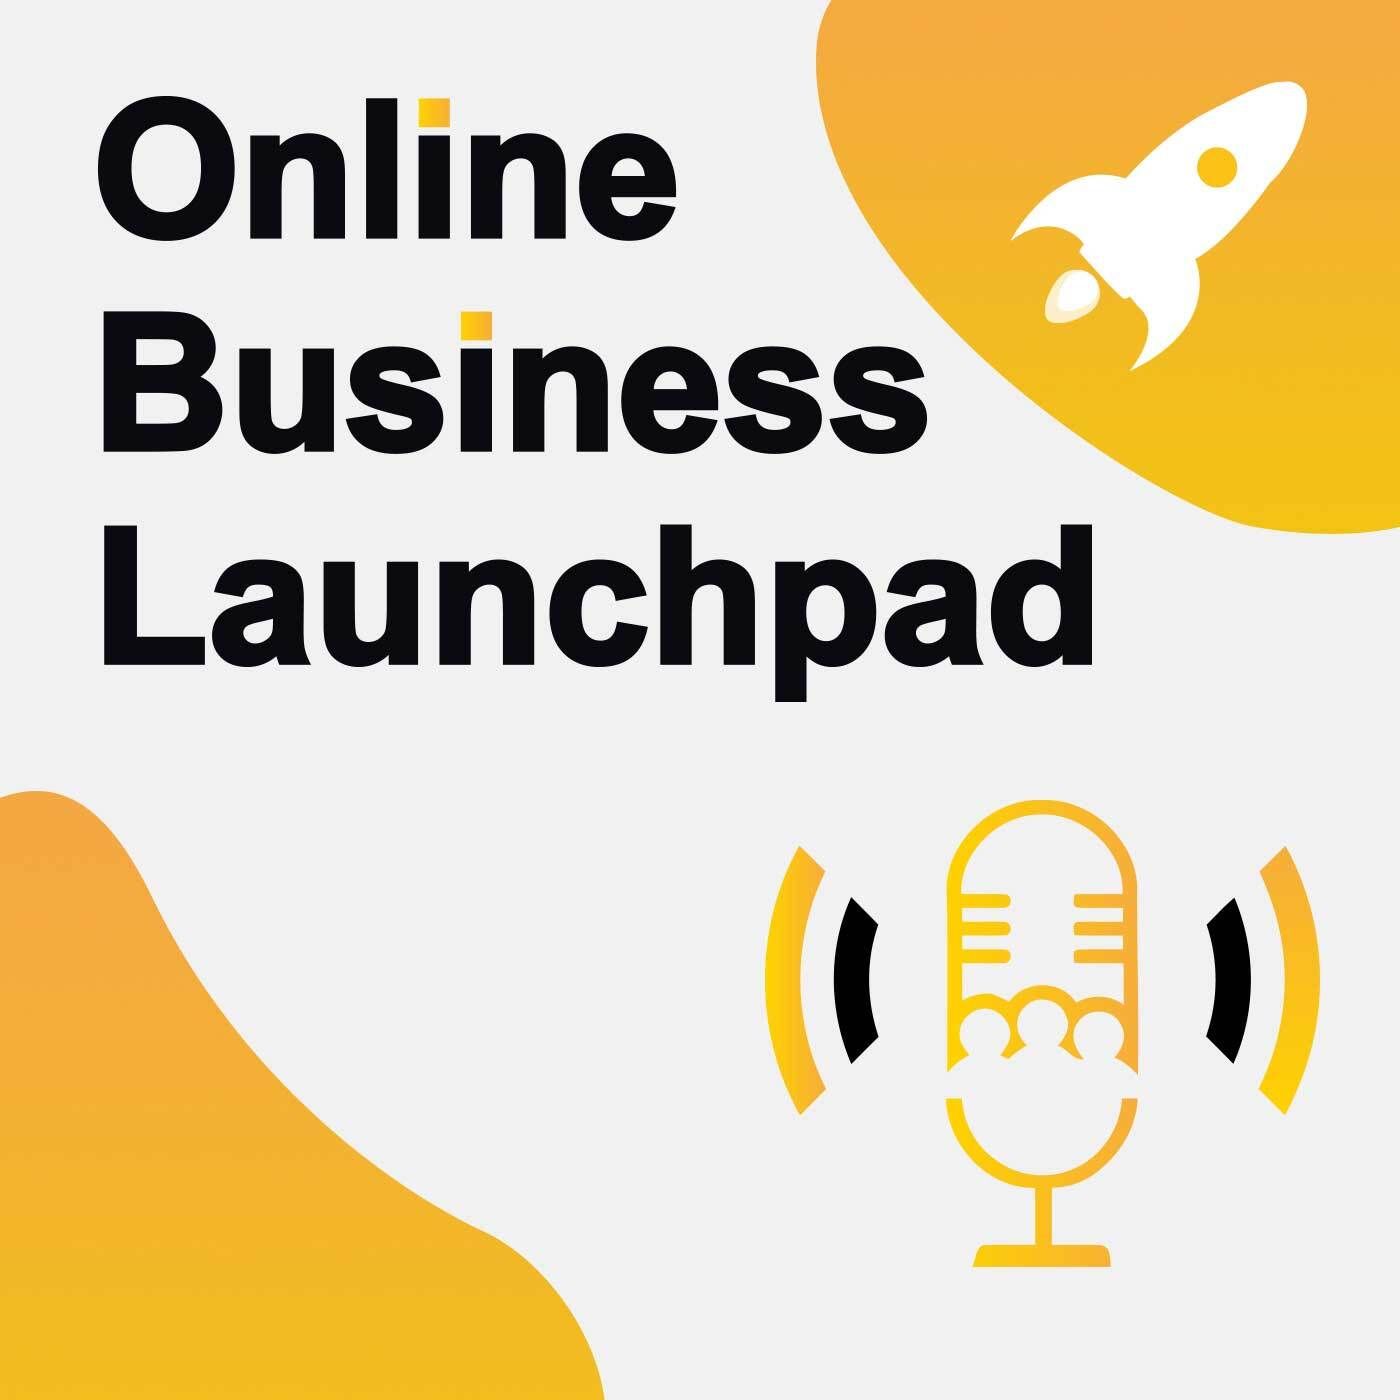 Online Business Investing Made Simple:  A Chat with Webstreet.co’s Kyle Kuderewski